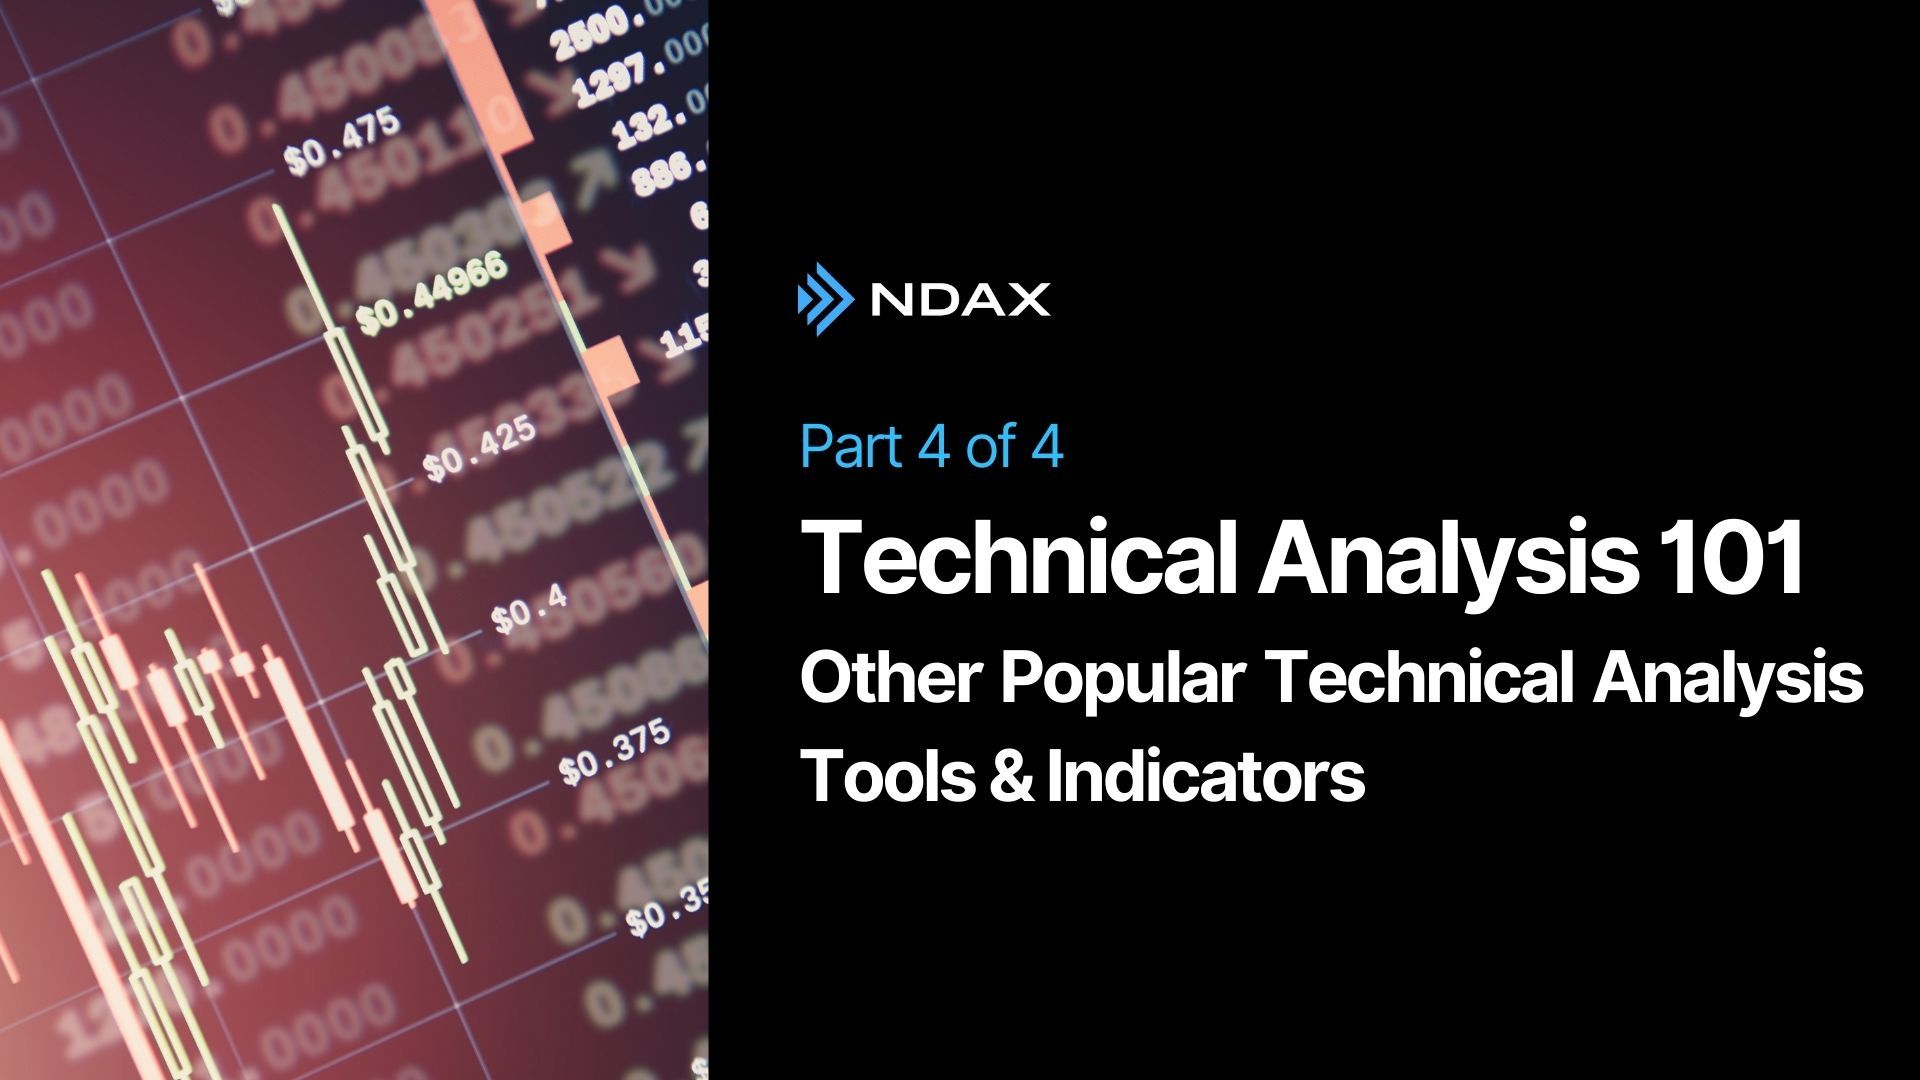 Part 4 of 4: Other Popular Technical Analysis Tools & Indicators